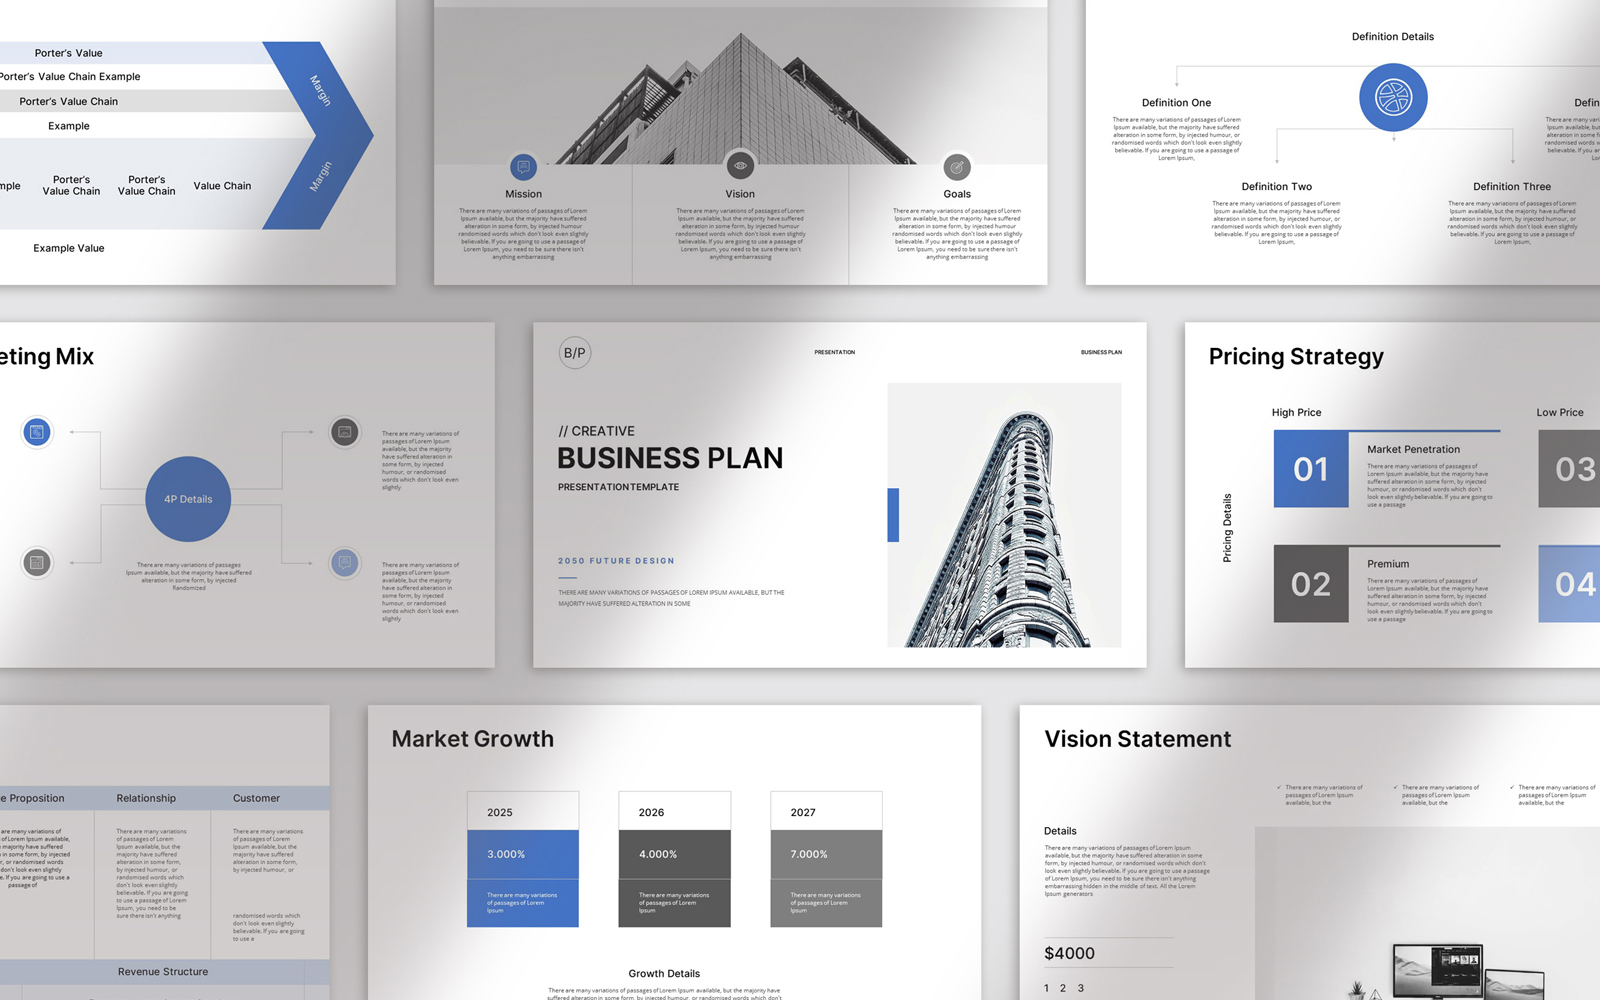 The Business Plan Presentation Template